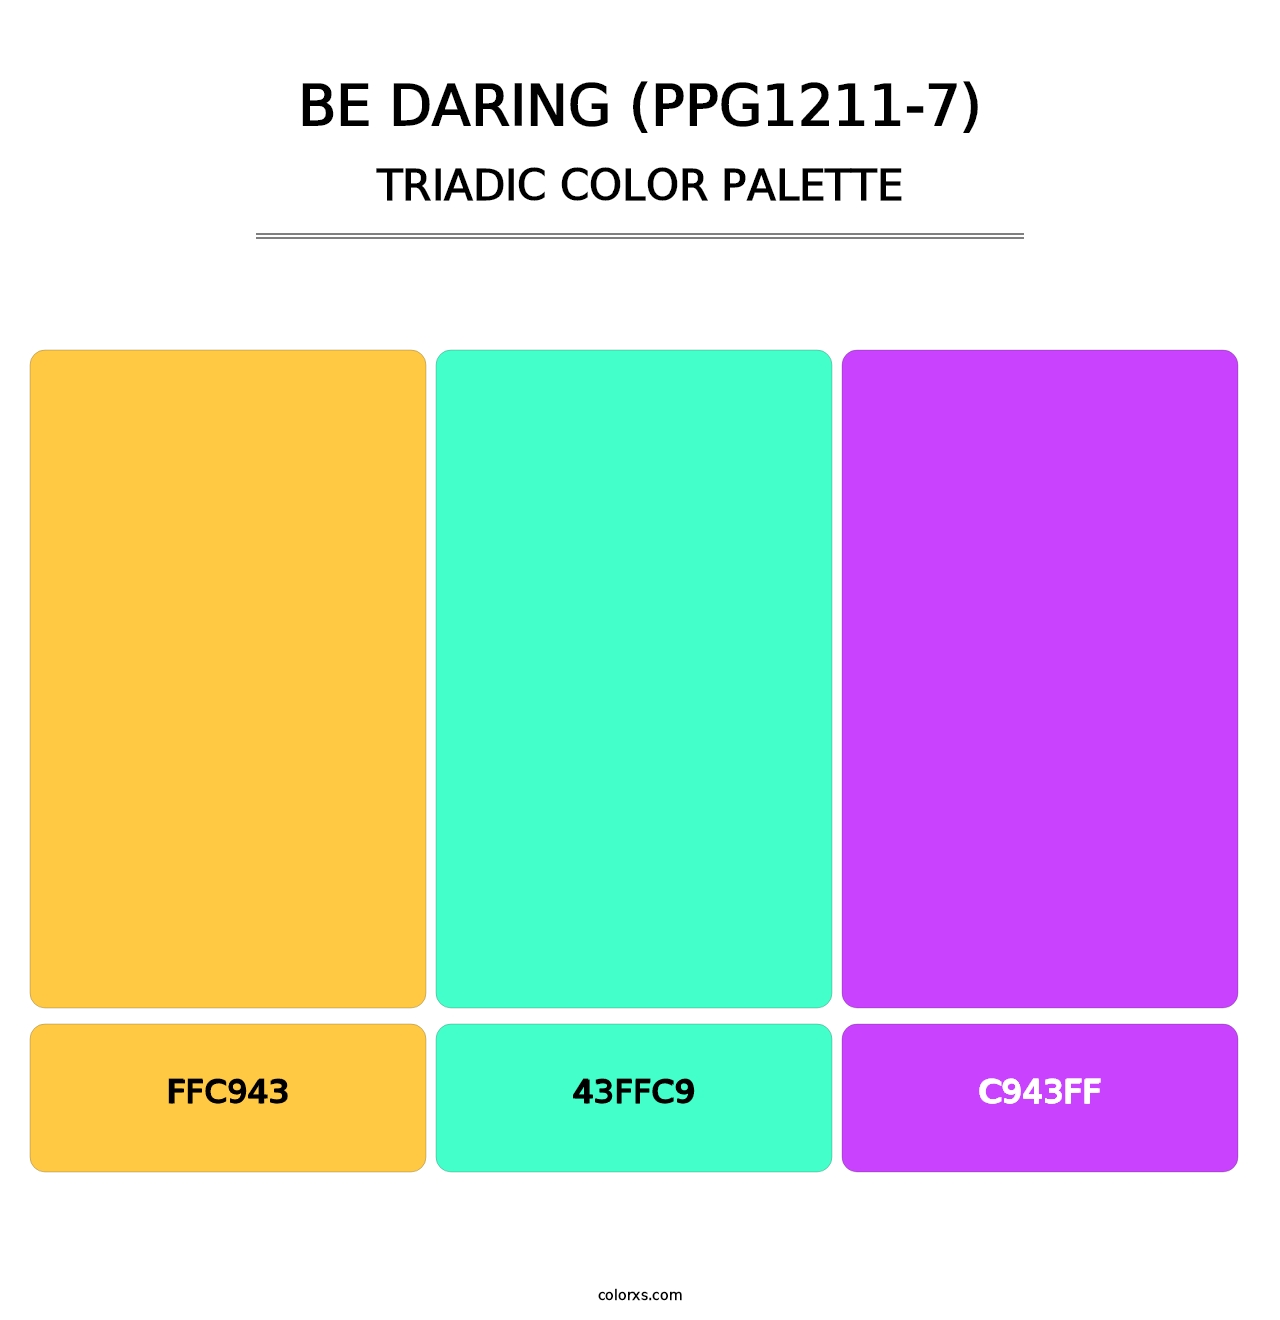 Be Daring (PPG1211-7) - Triadic Color Palette